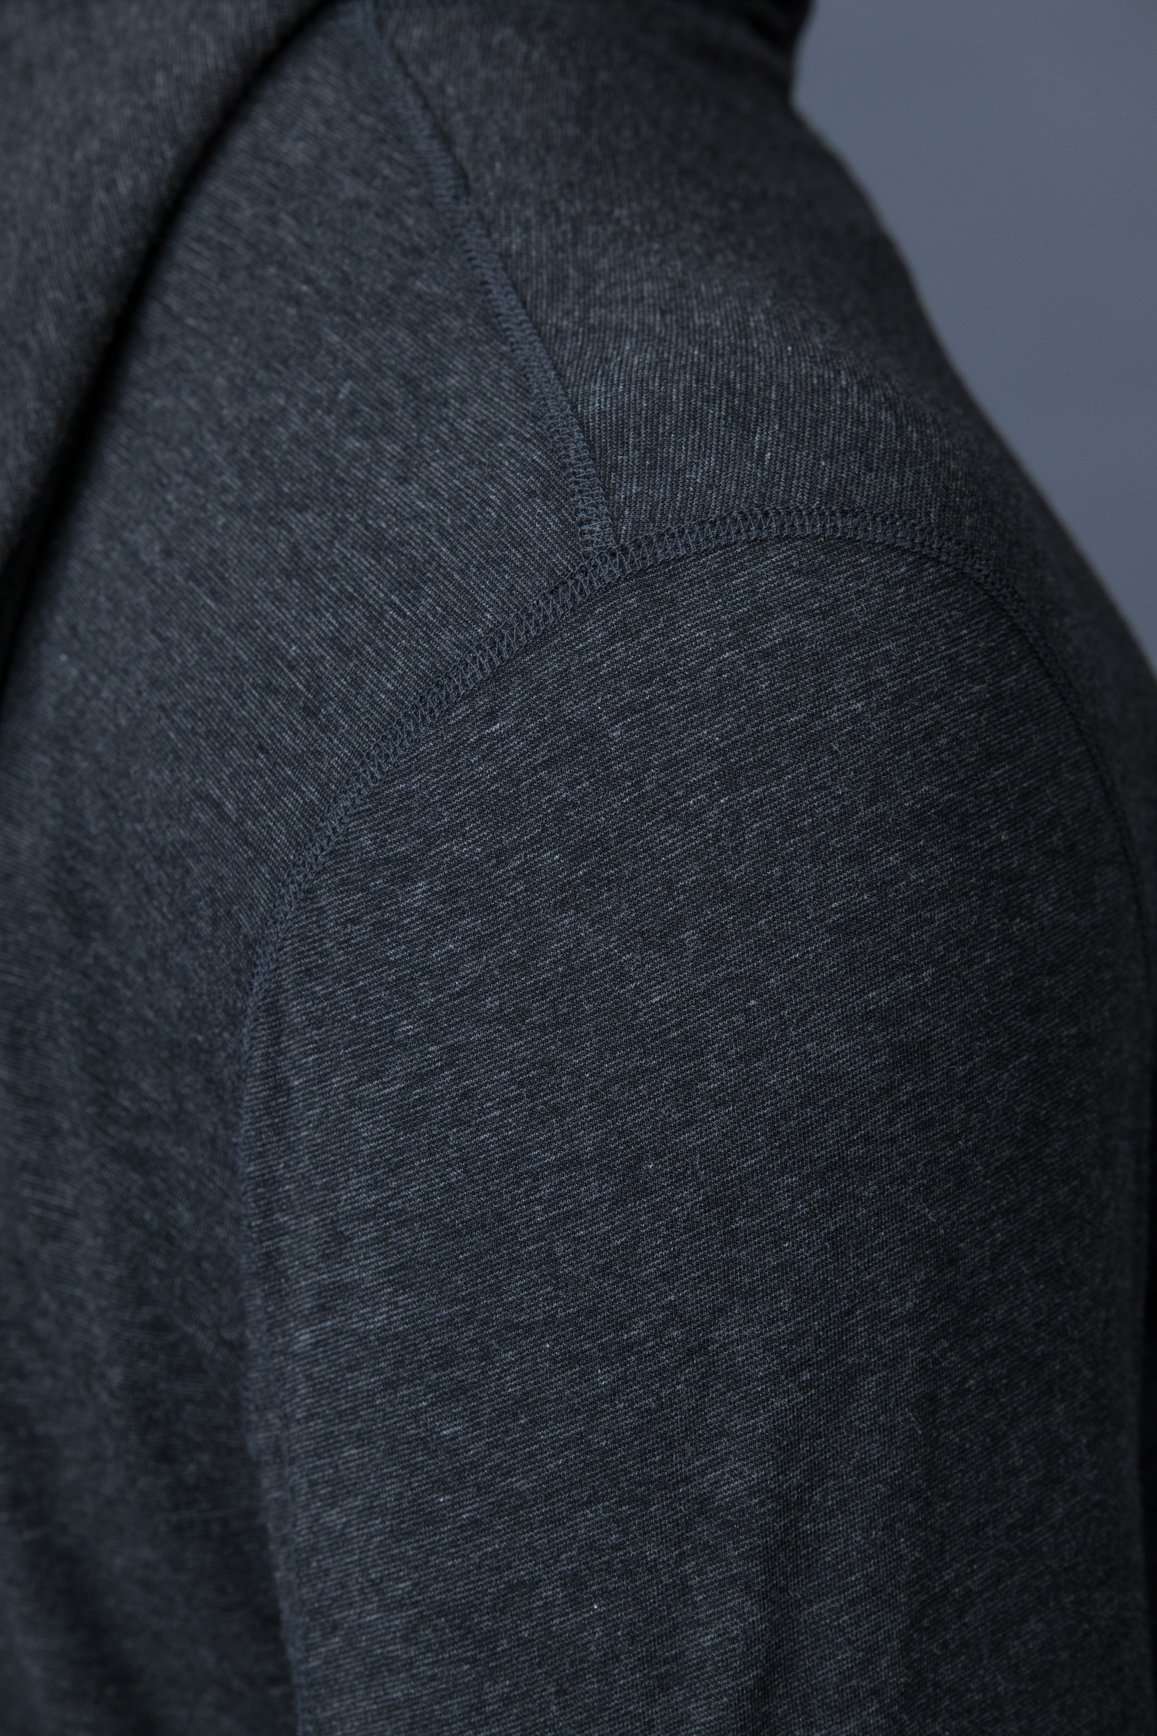 The Navas Lab Vasquez Microstripe long-sleeve hooded shirt detail for tall guys in Charcoal mix. The perfect tall slim shirt for tall and slim guys looking for style and comfort.